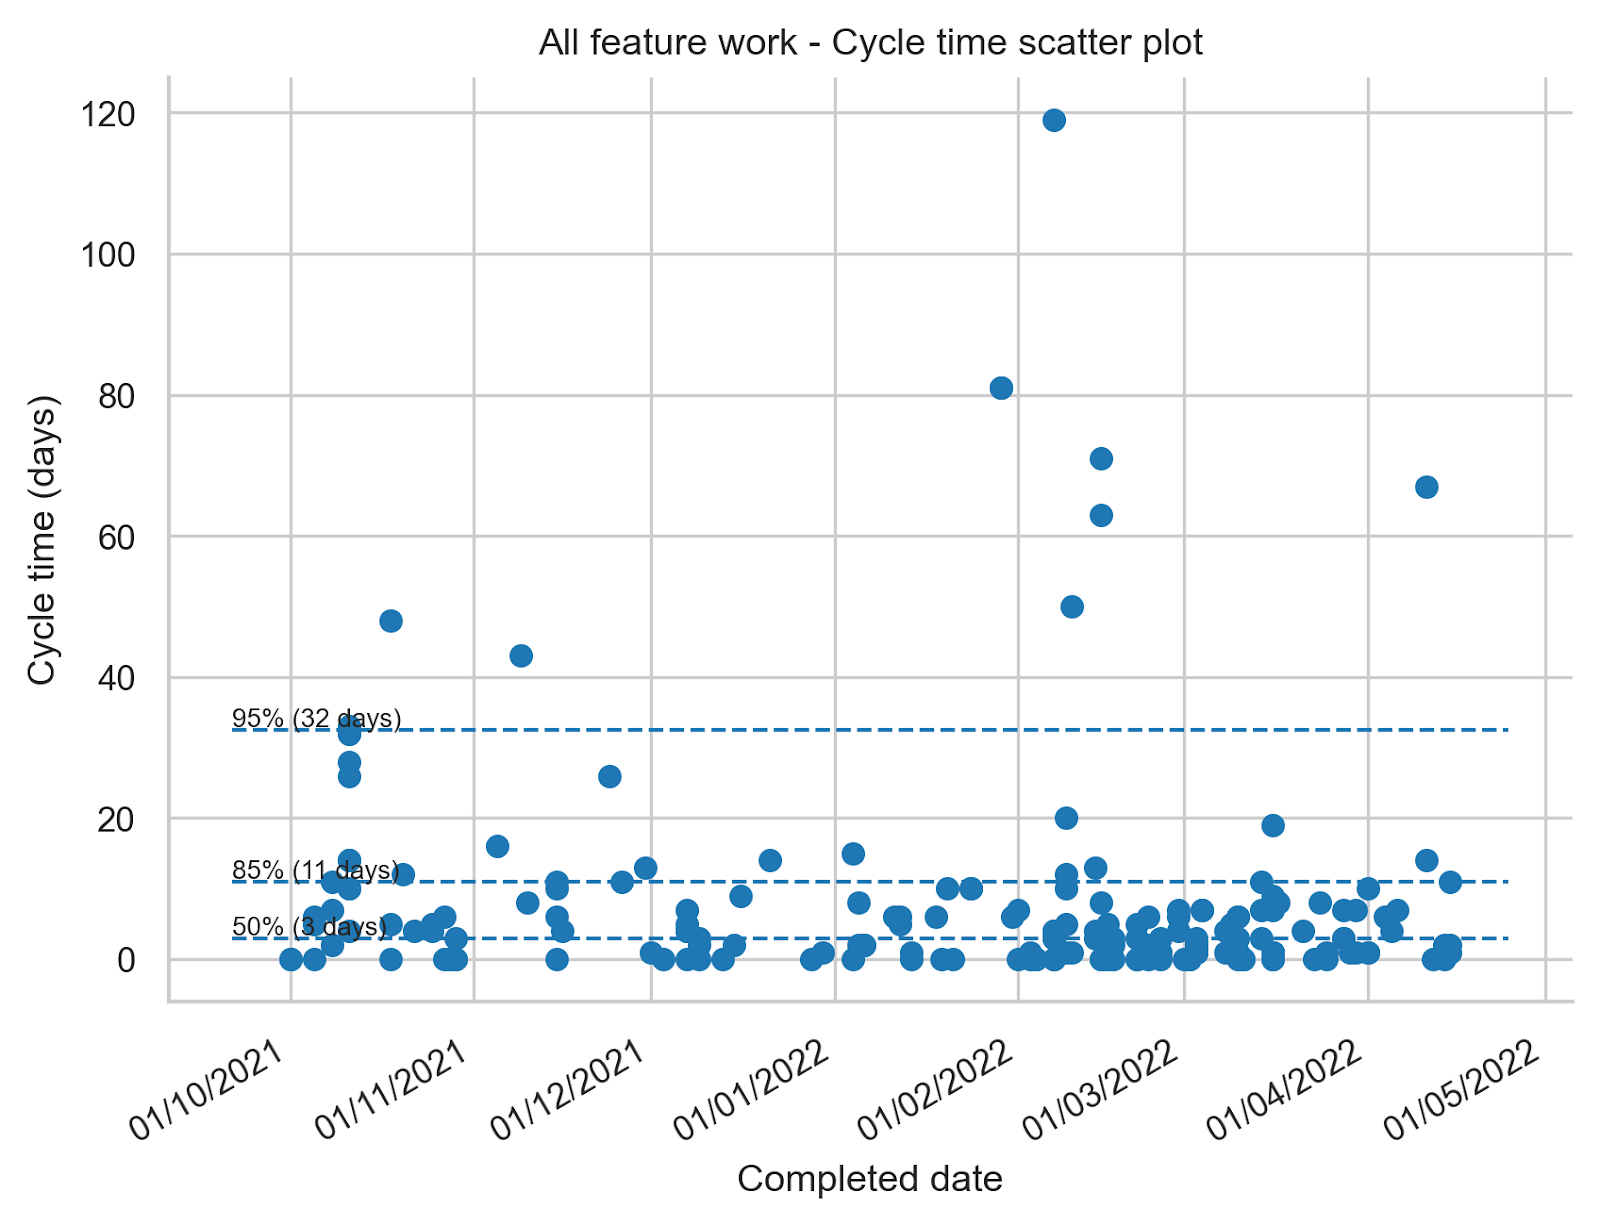 "Overview of the cycle time of work items with a 50th percentile of 3 days, 85th percentile of 11 days and 95th percentile of 32 days"